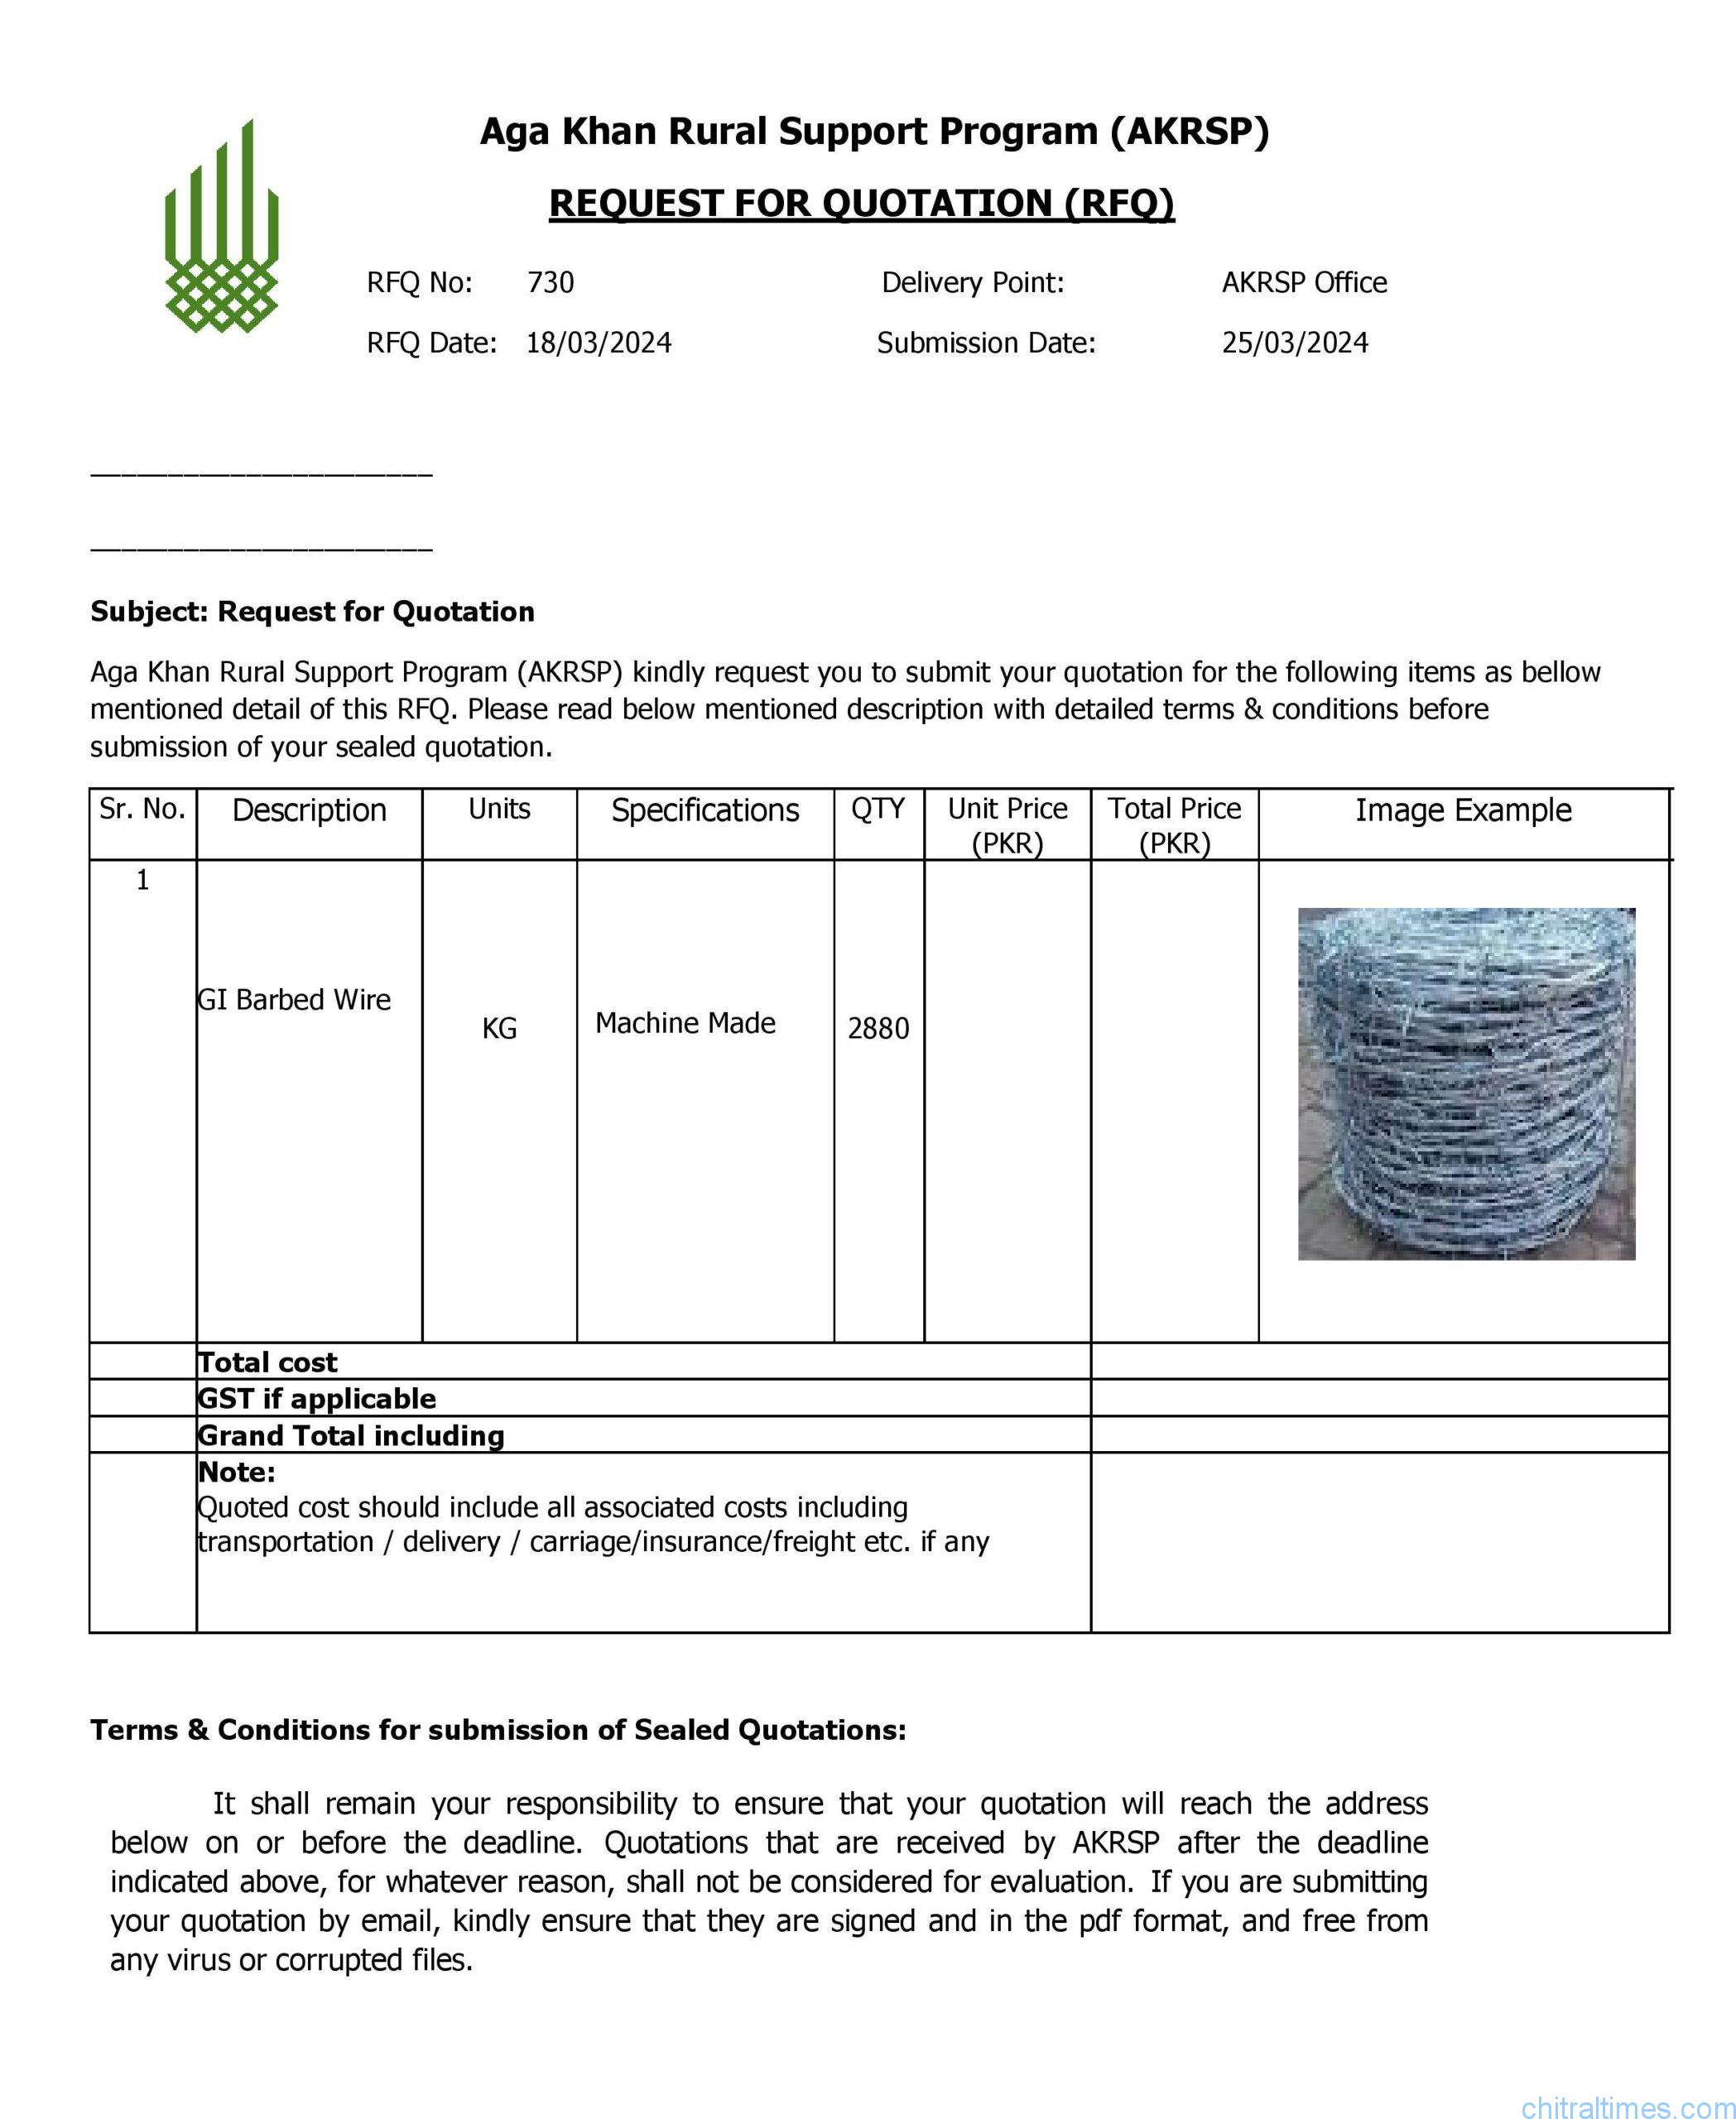 akrsp RFQ Barbed Wire 1 scaled